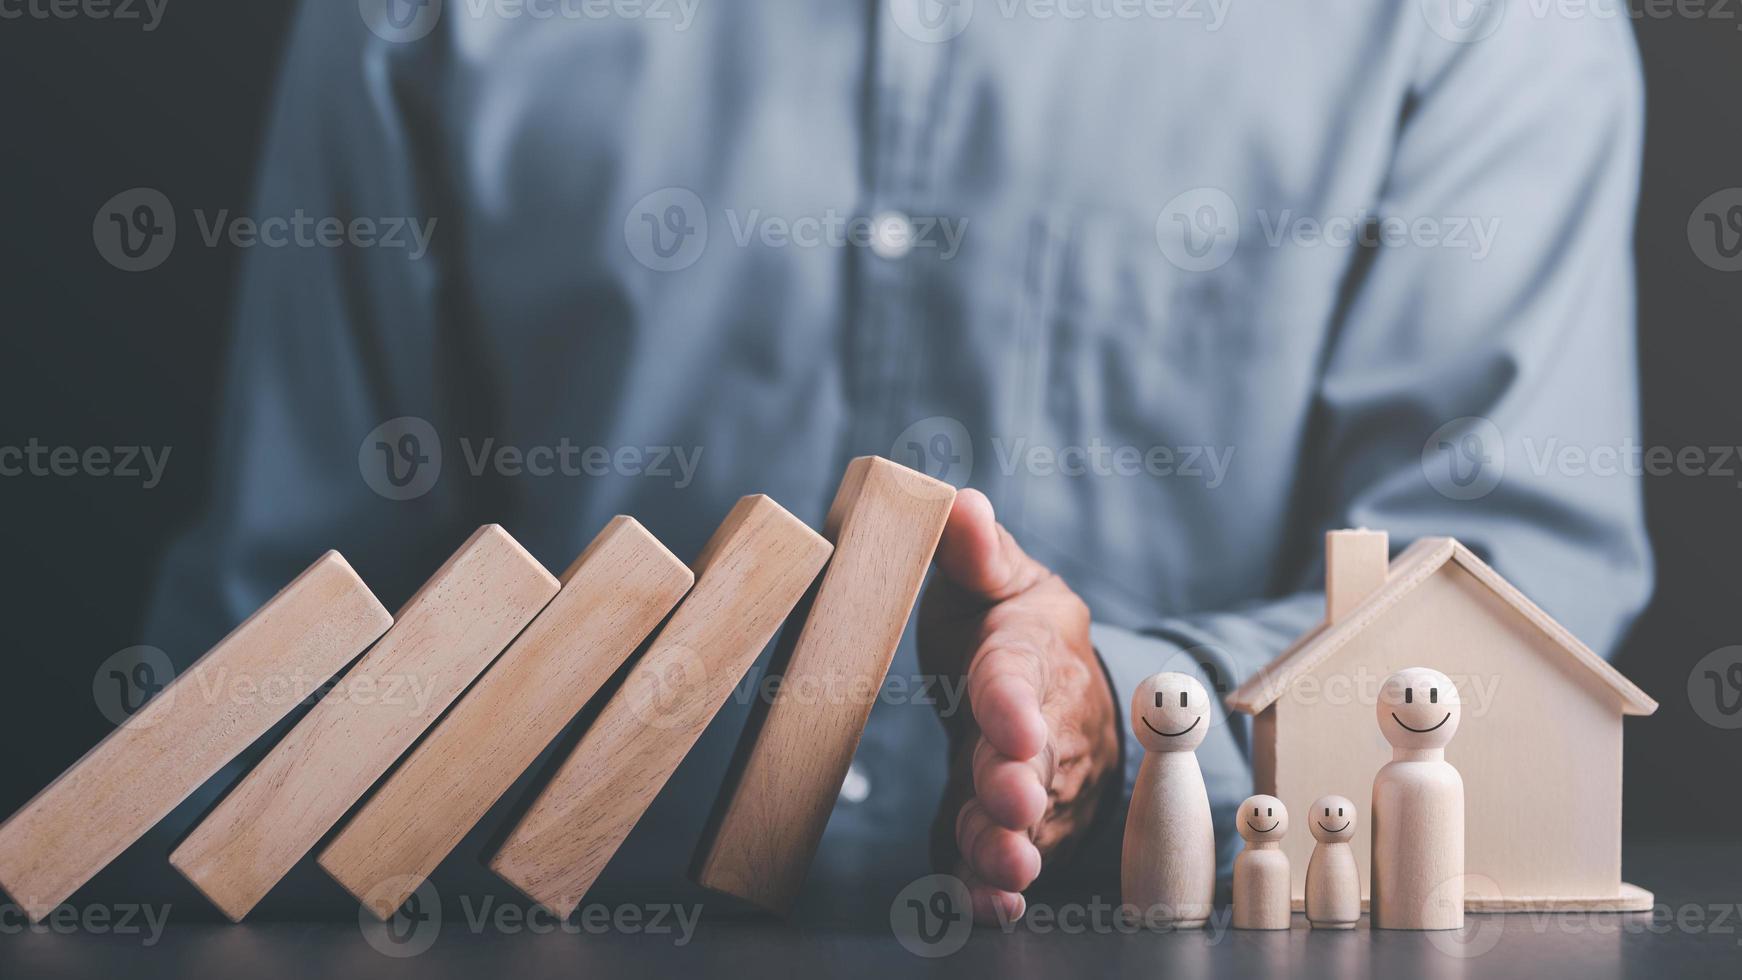 Human hand blocking wooden blocks,Represents protection and protection of safety,concept of insurance management planning To ensure both health and financial safety,Property and Family Risk Reduction photo